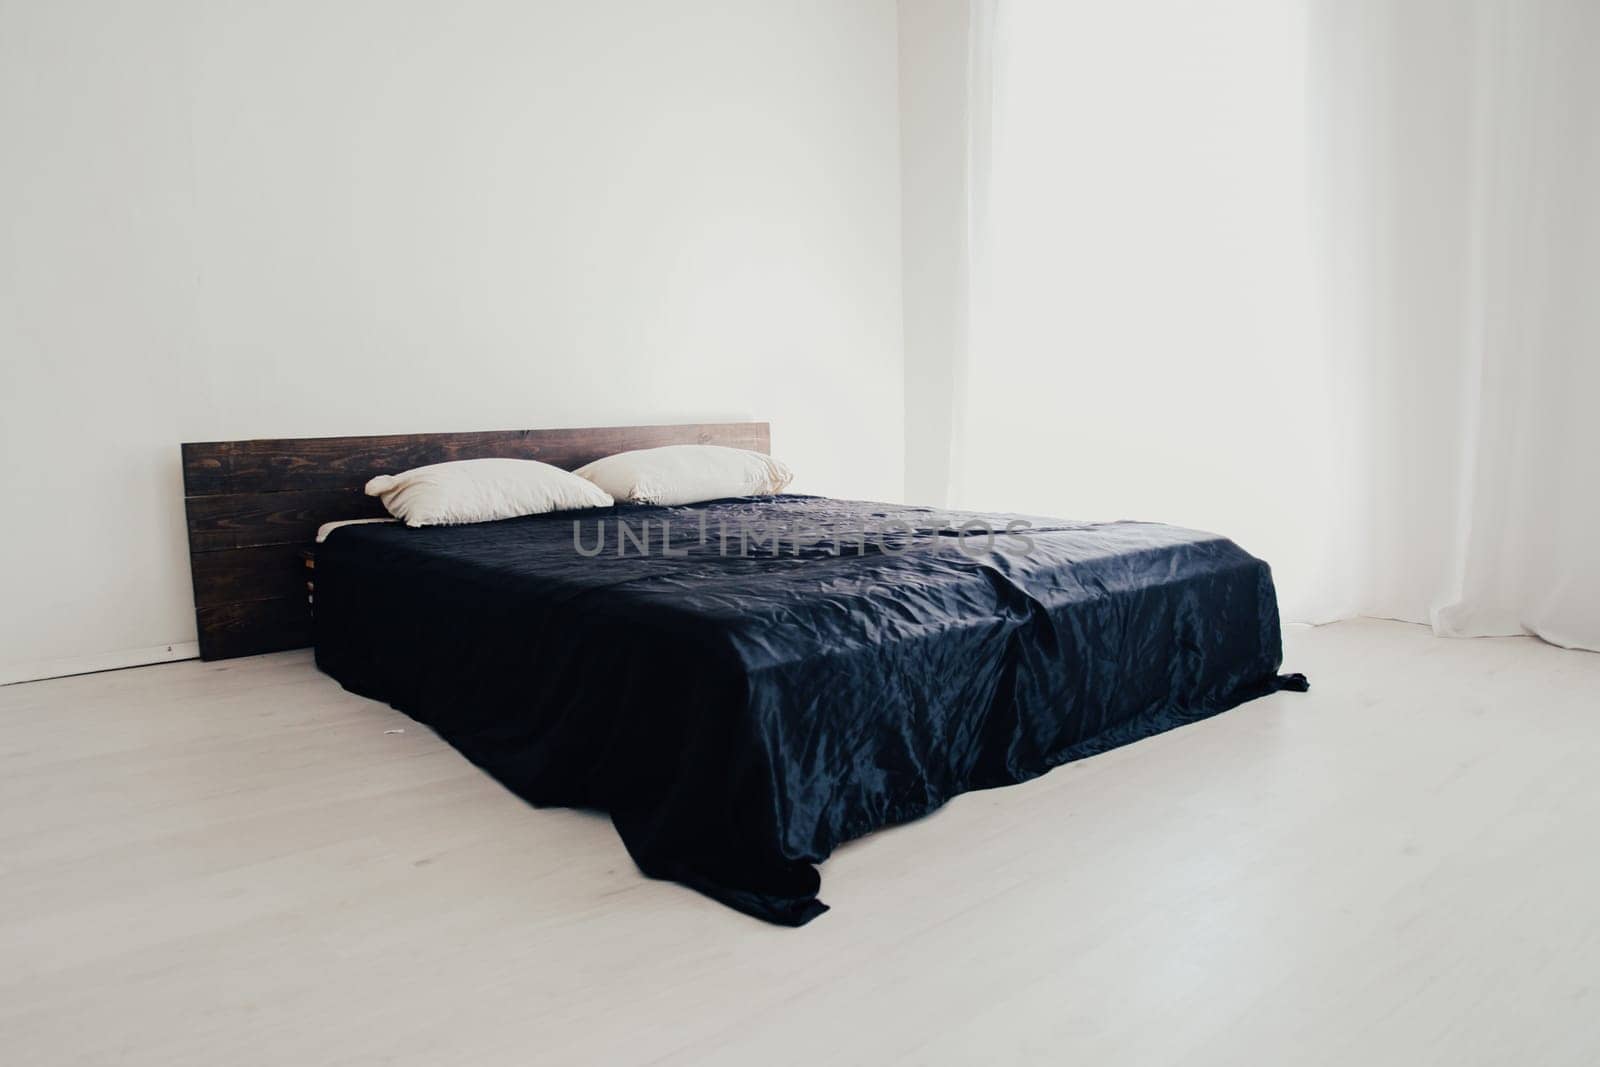 Interior white spal'nti bed with black linen